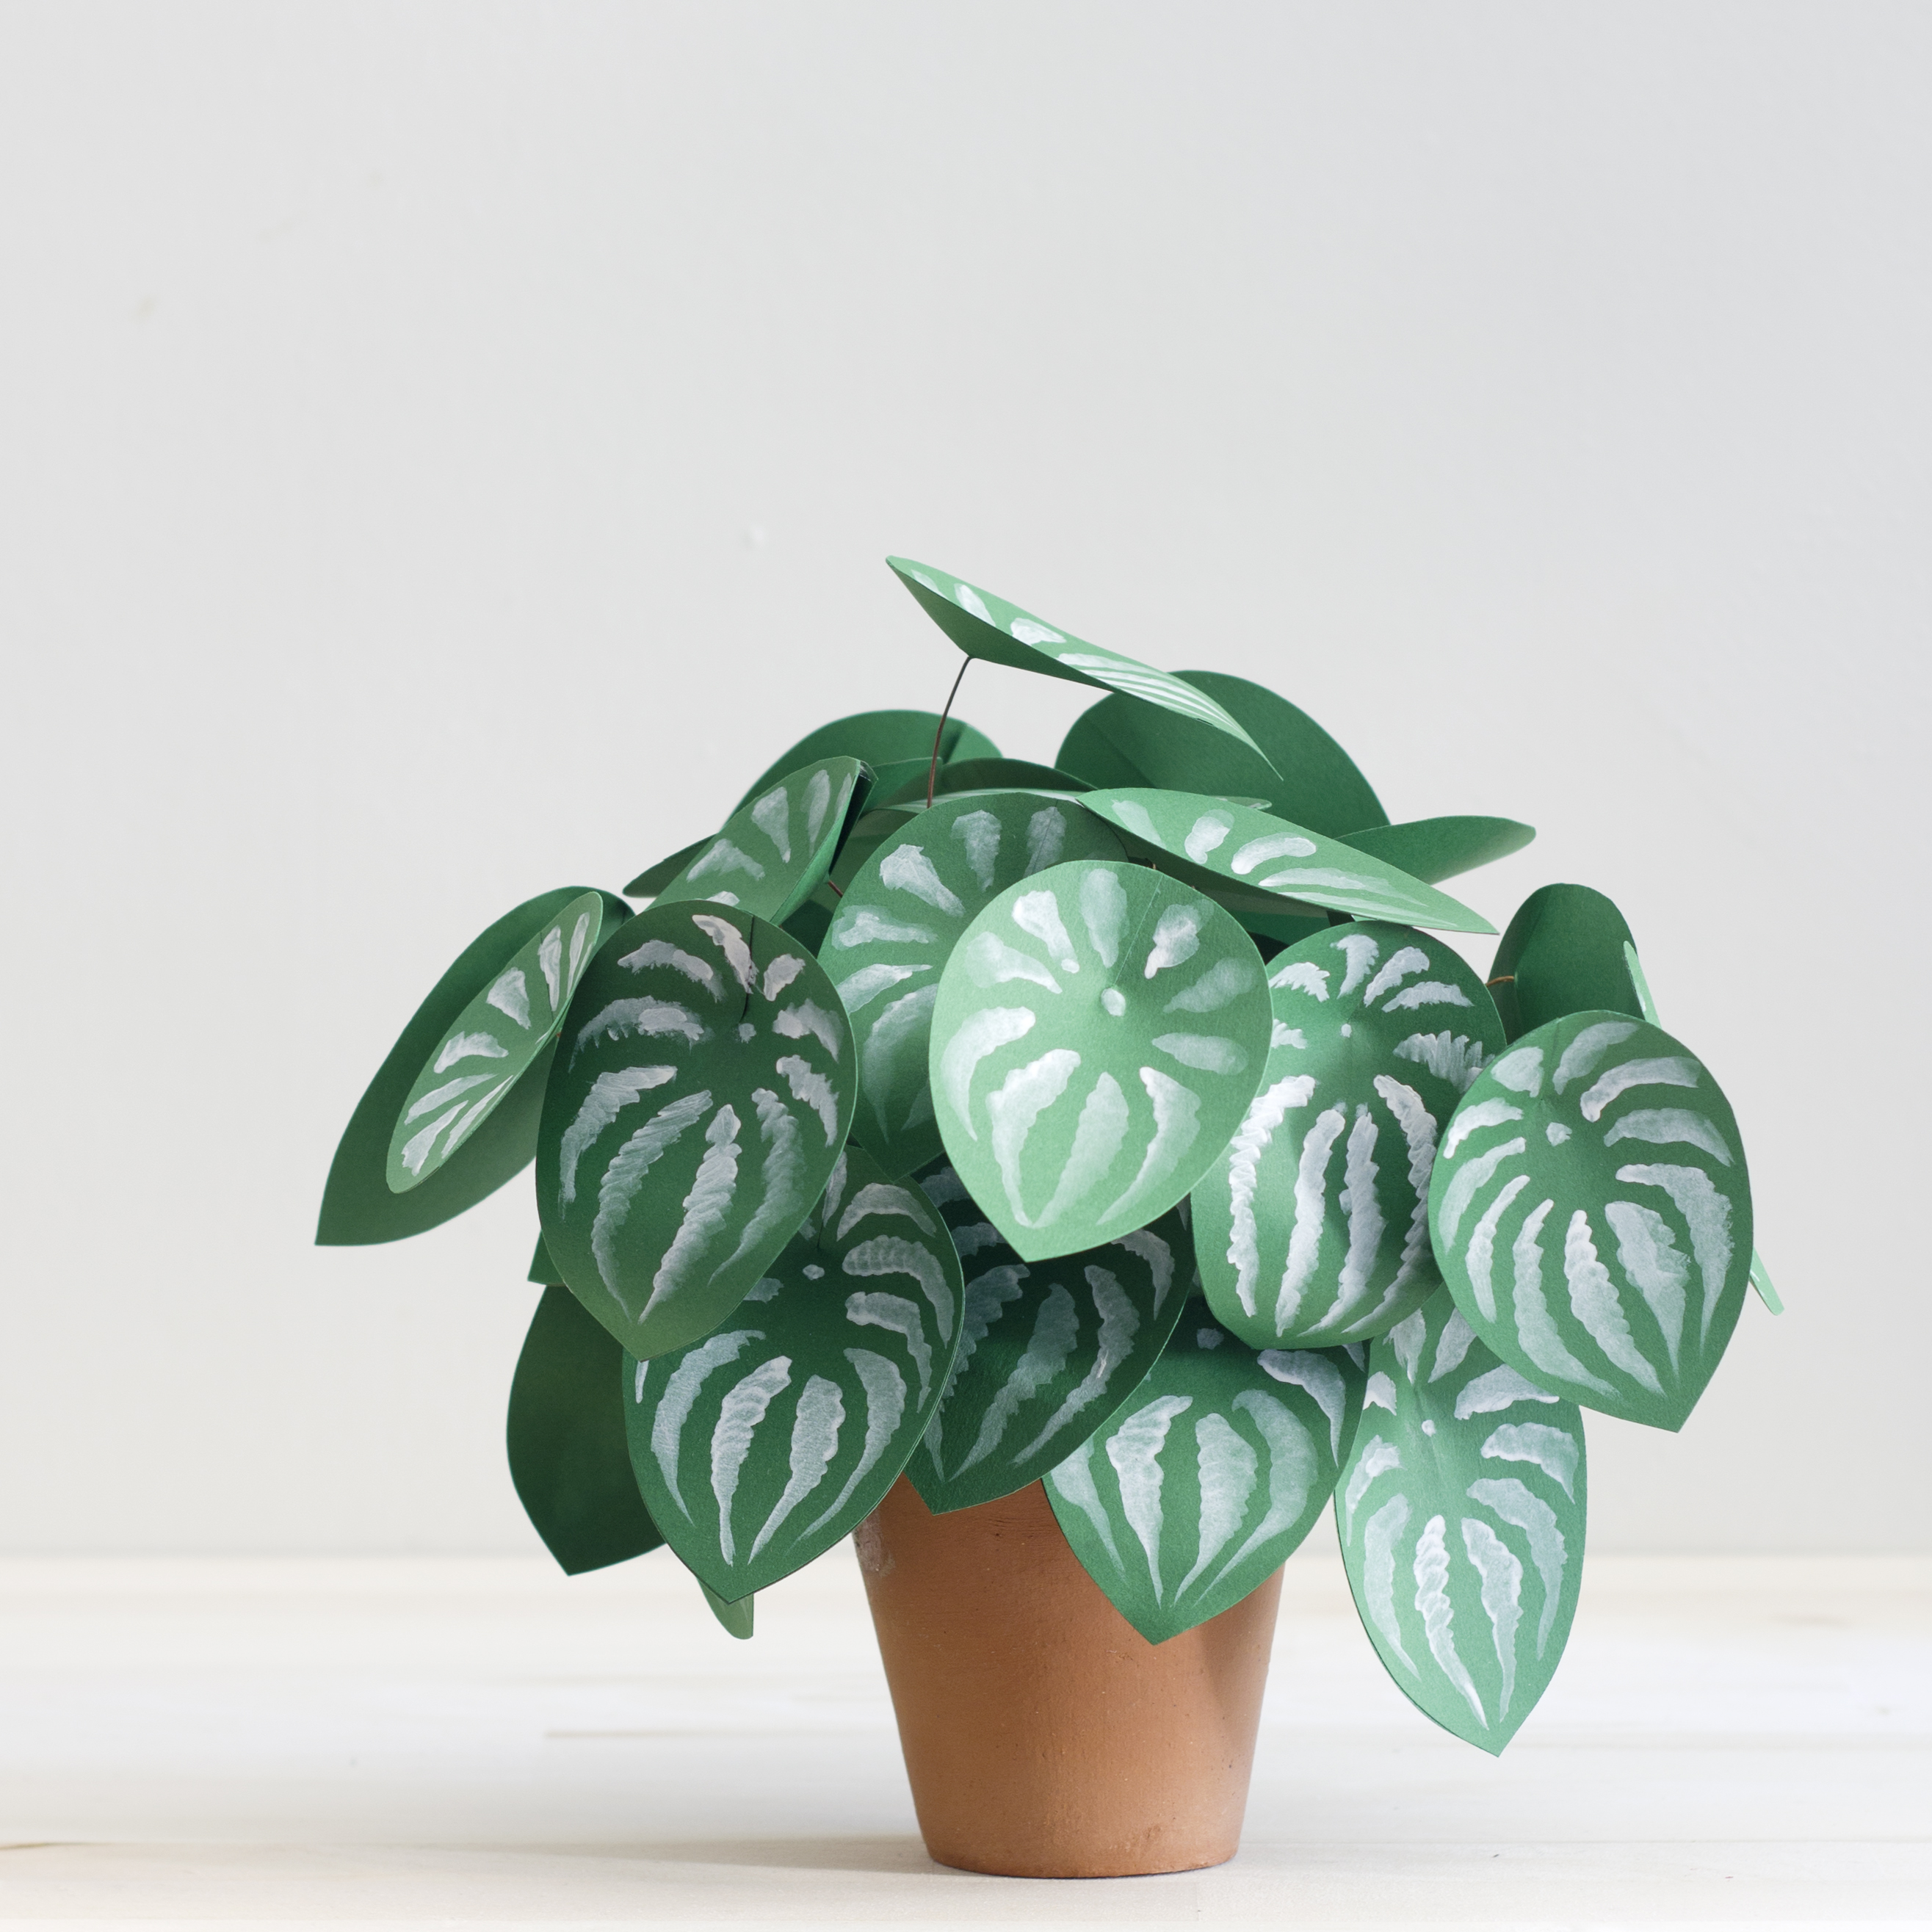 DIY paper plant by Corrie Beth Hogg